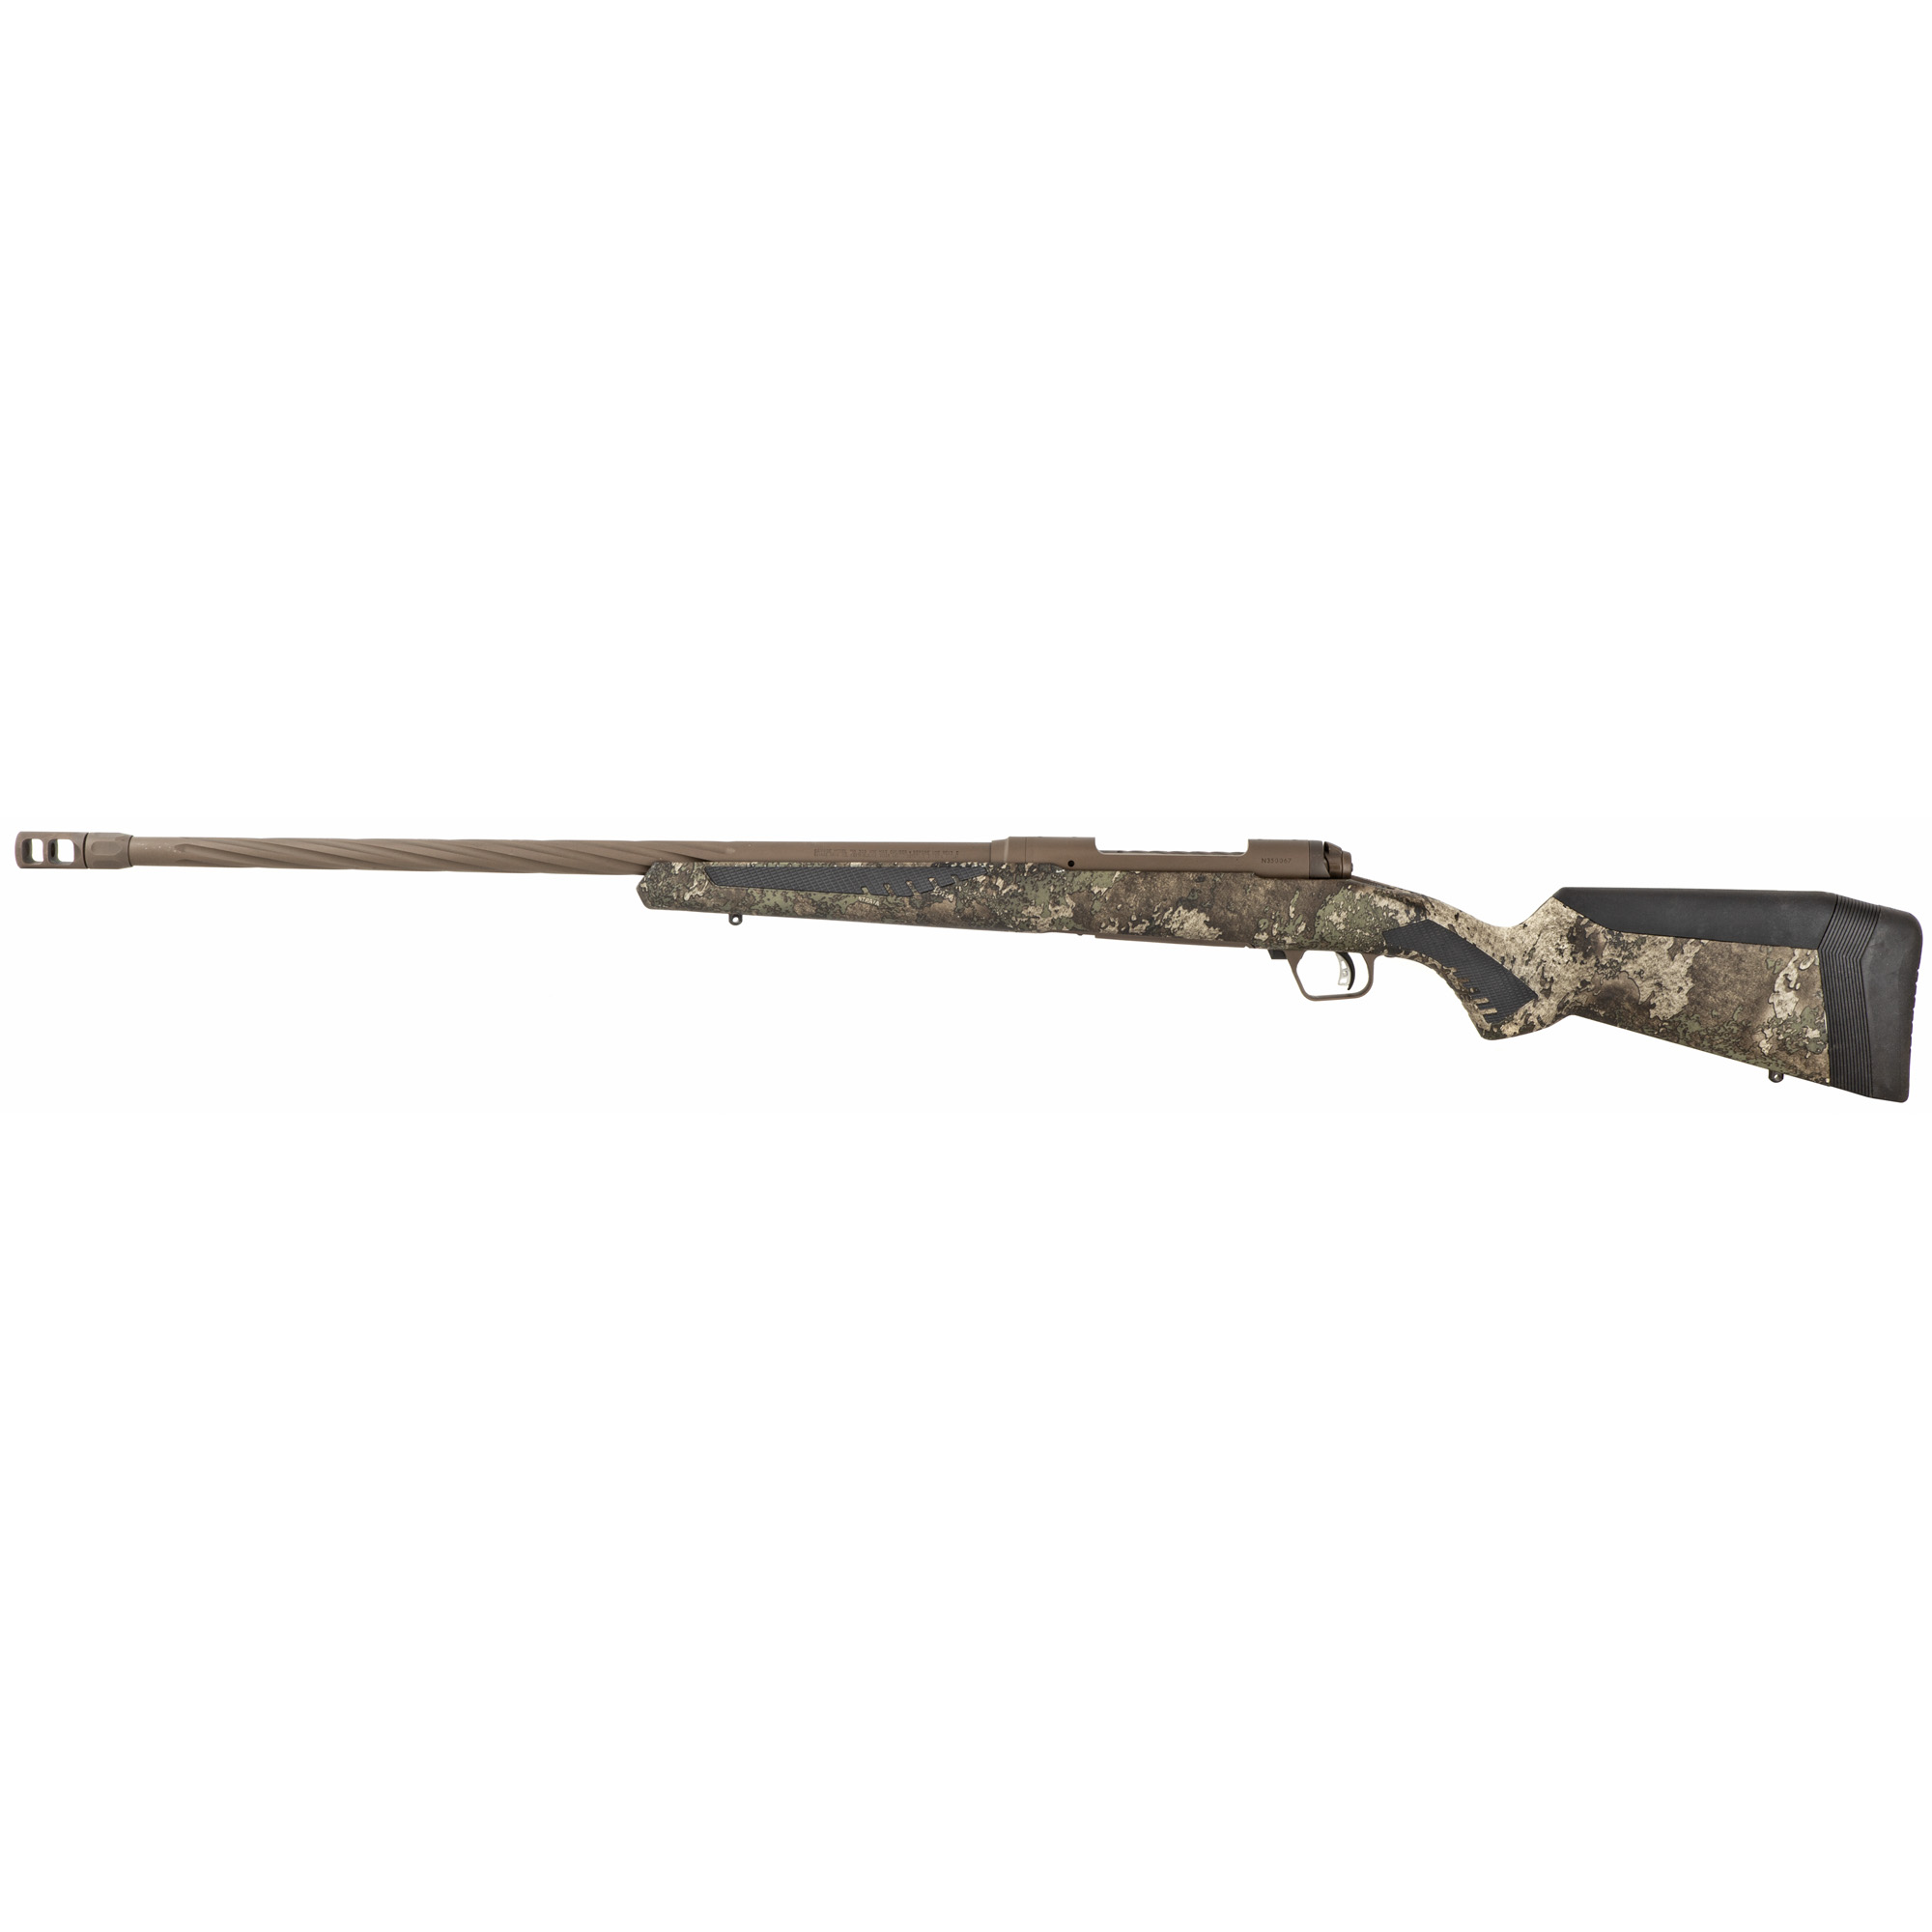 SAVAGE ARMS 110 HIGH CNTRY 7MM 24 TB 3RD